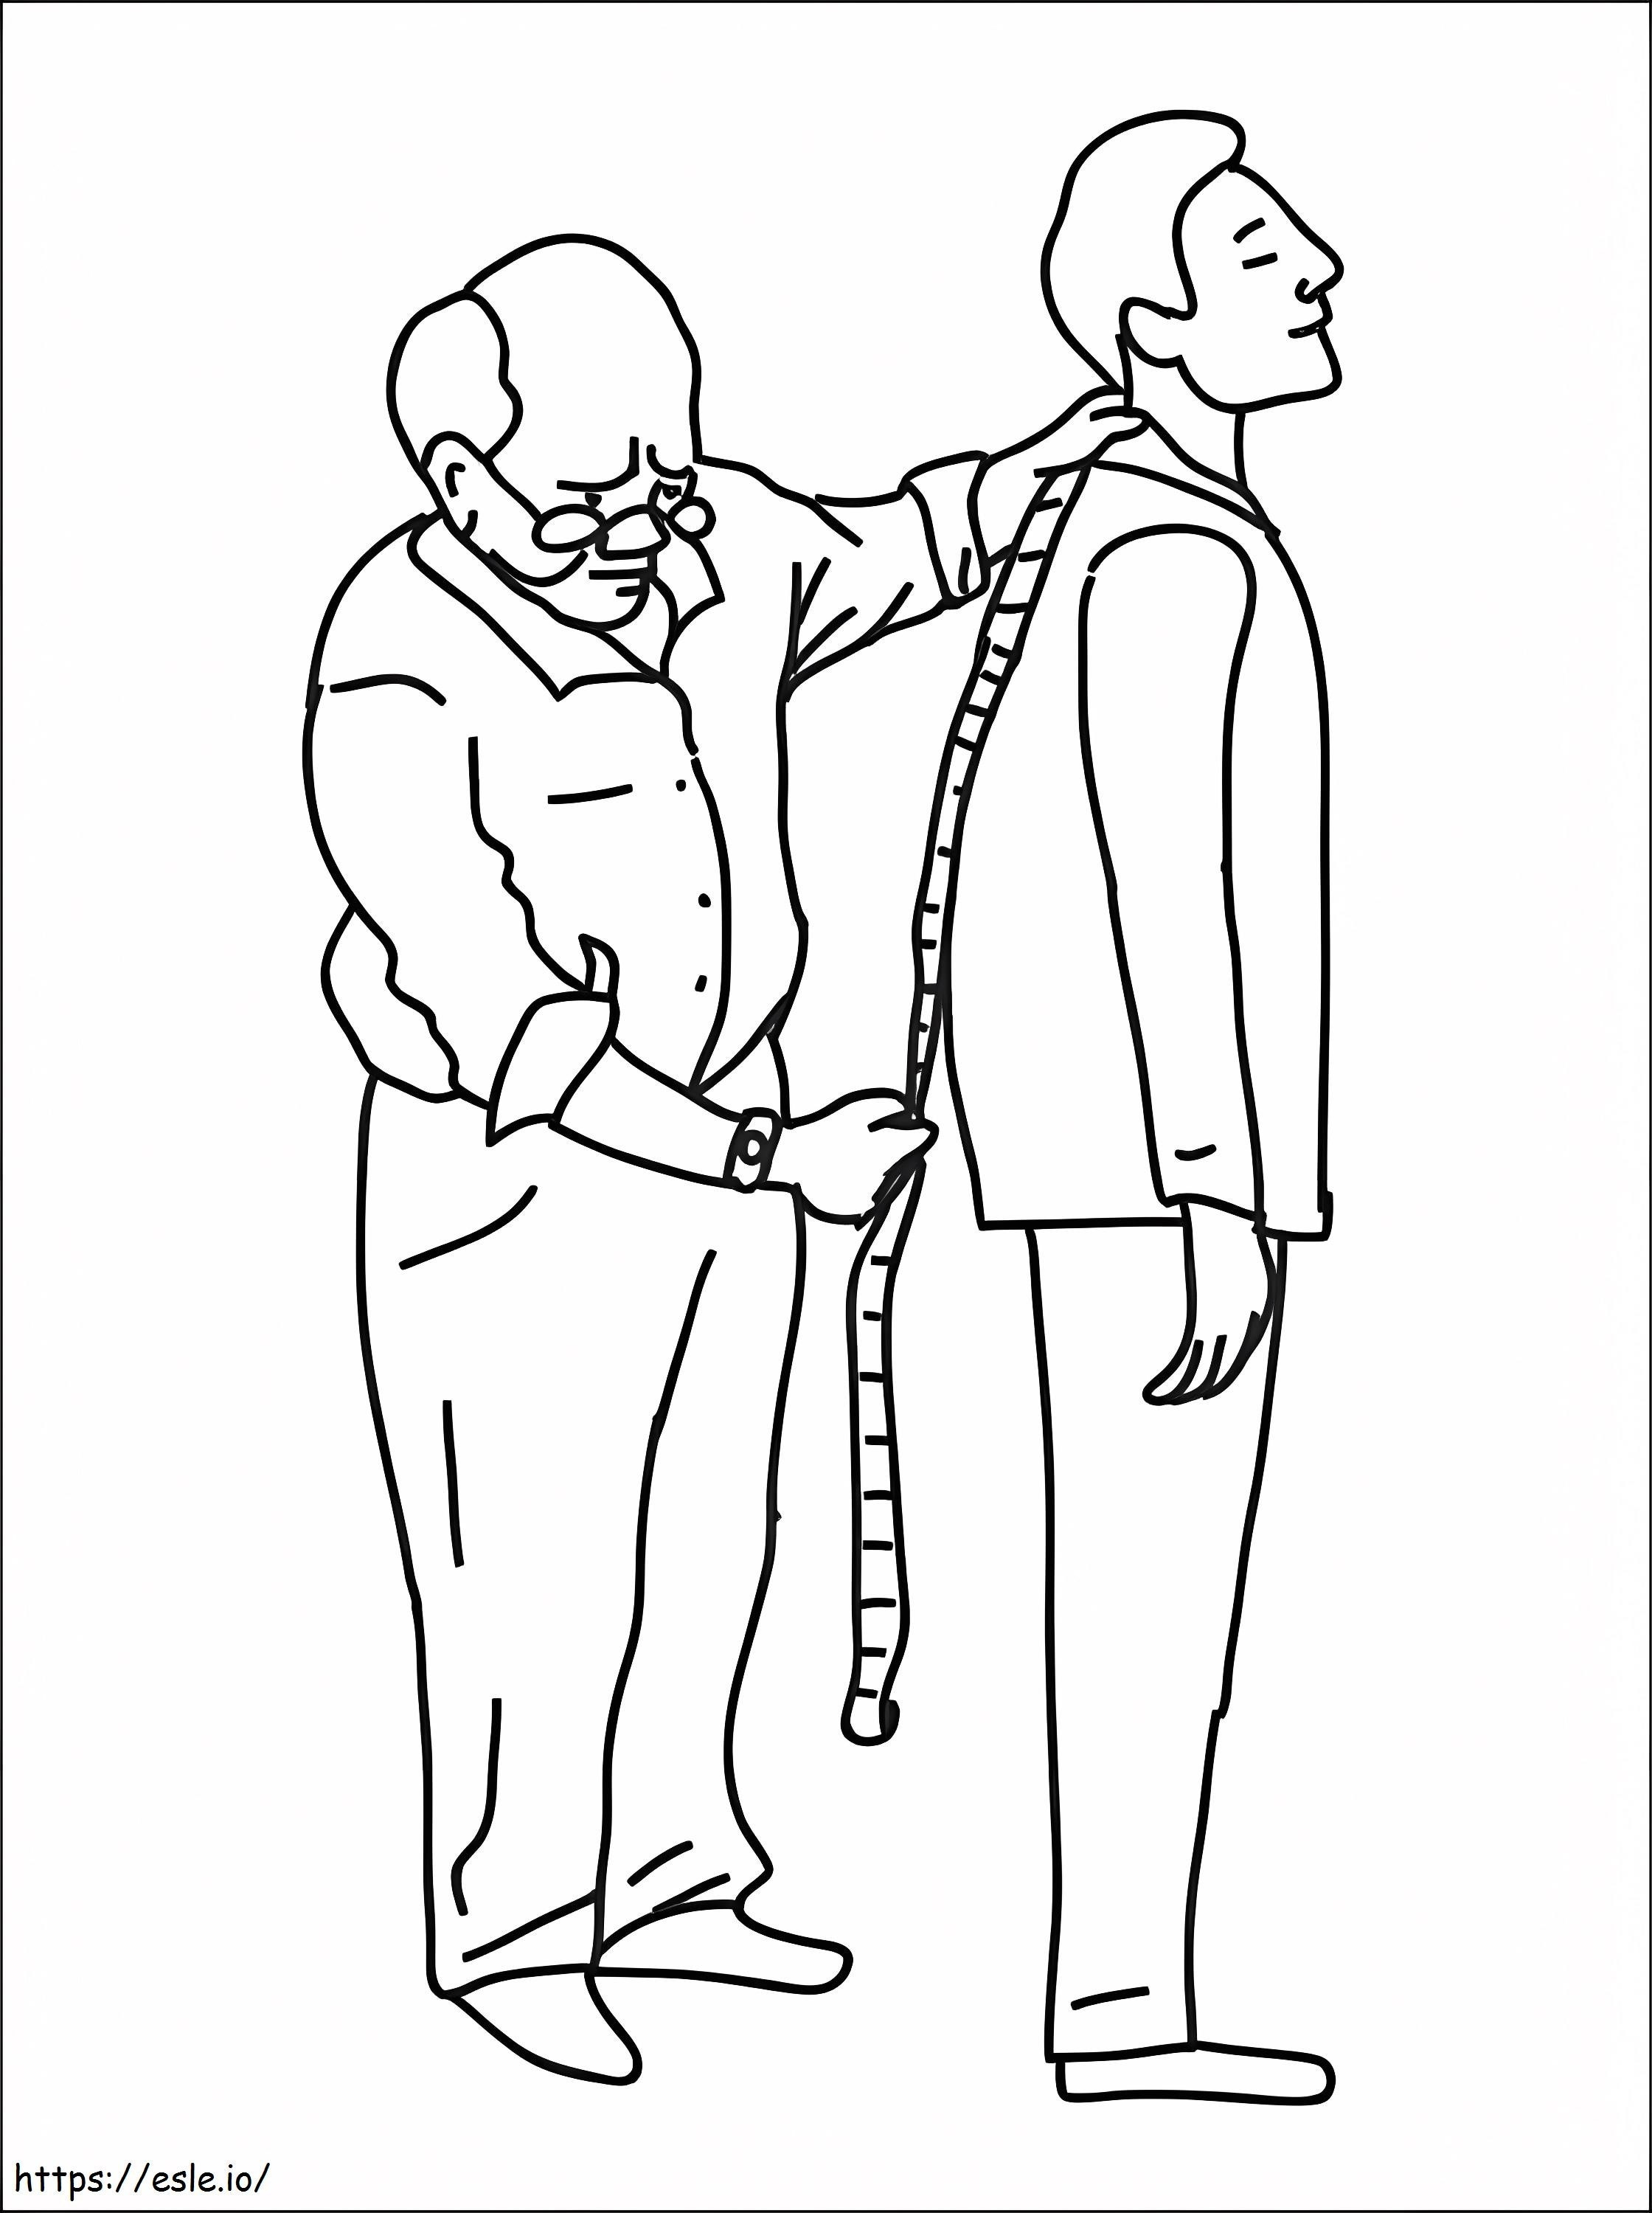 Man And Tailor coloring page